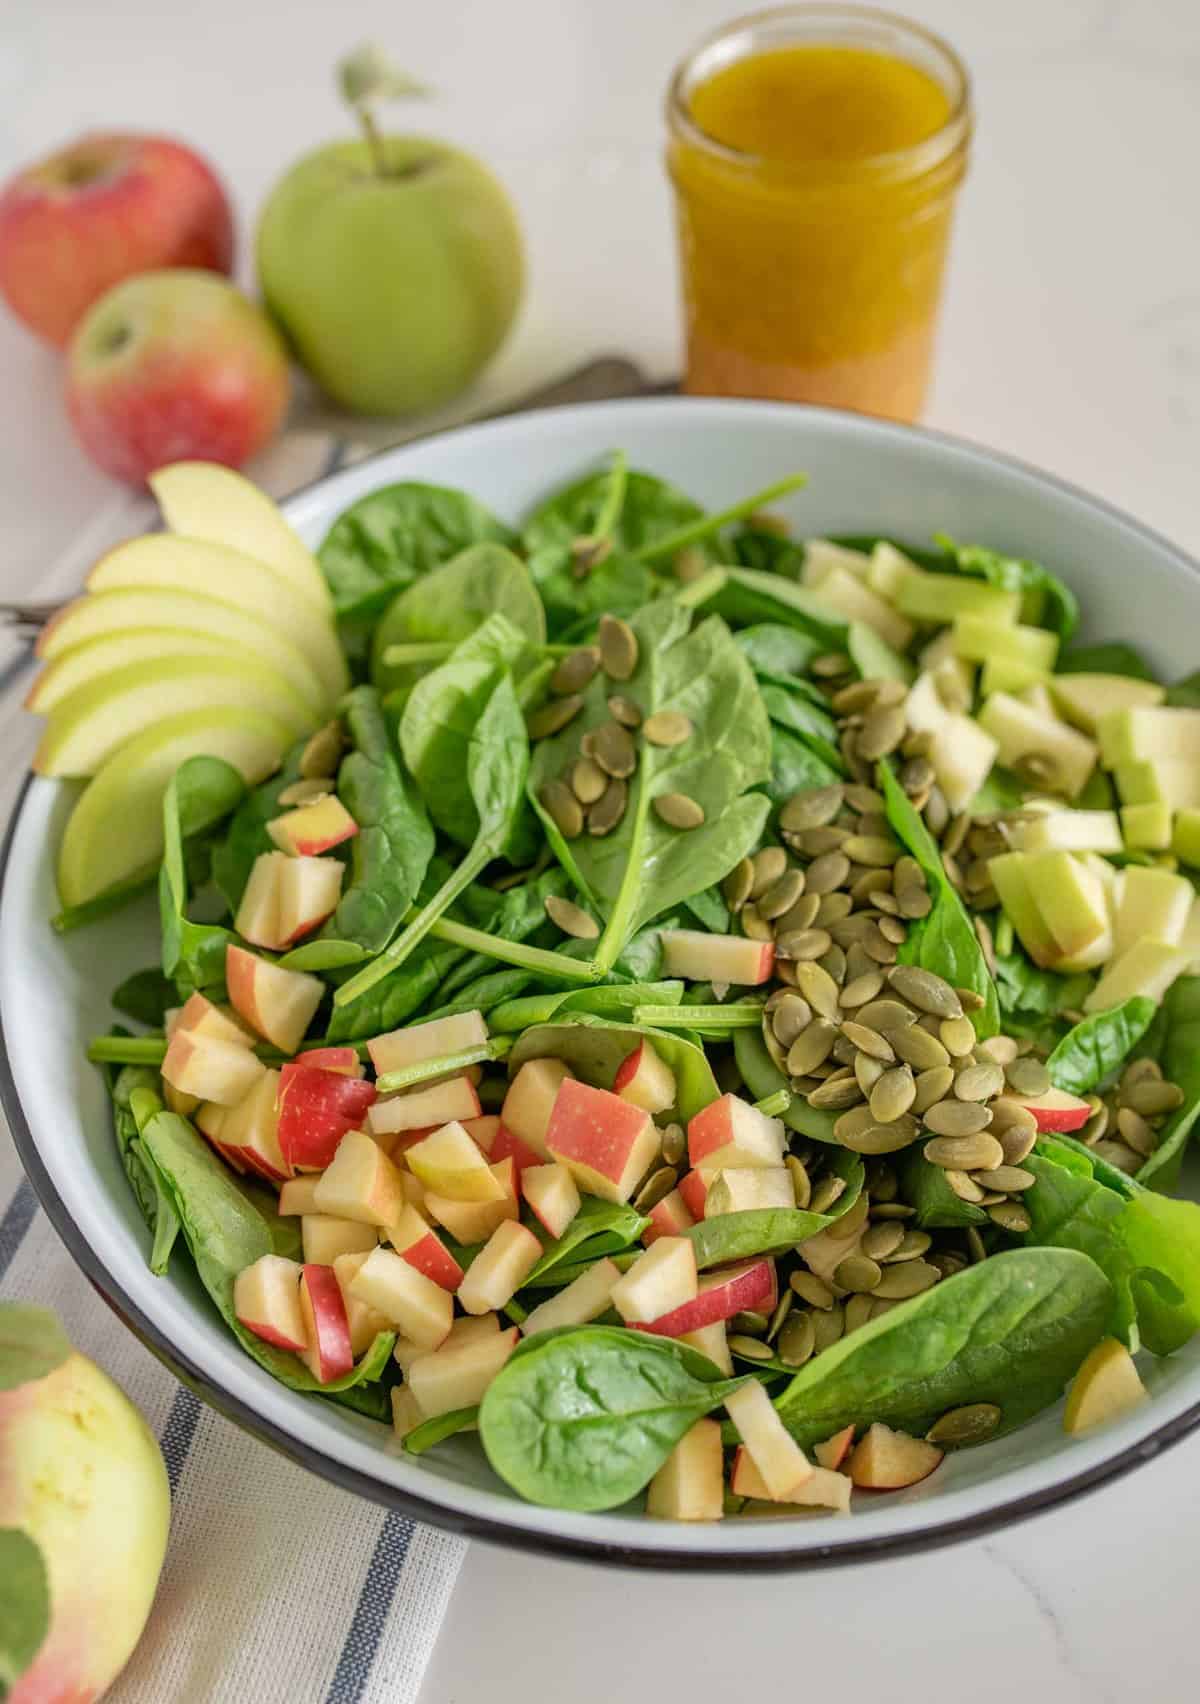 What do you put in a spinach salad?